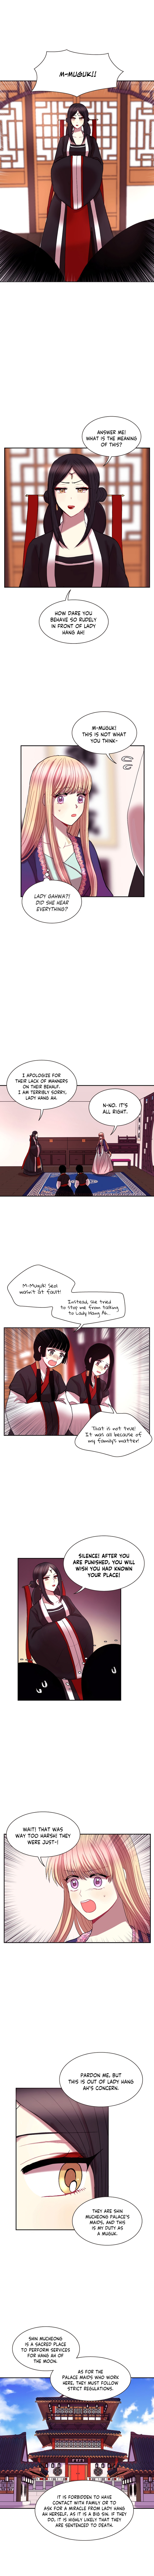 Hang Ah, The Moon's Child - Page 3